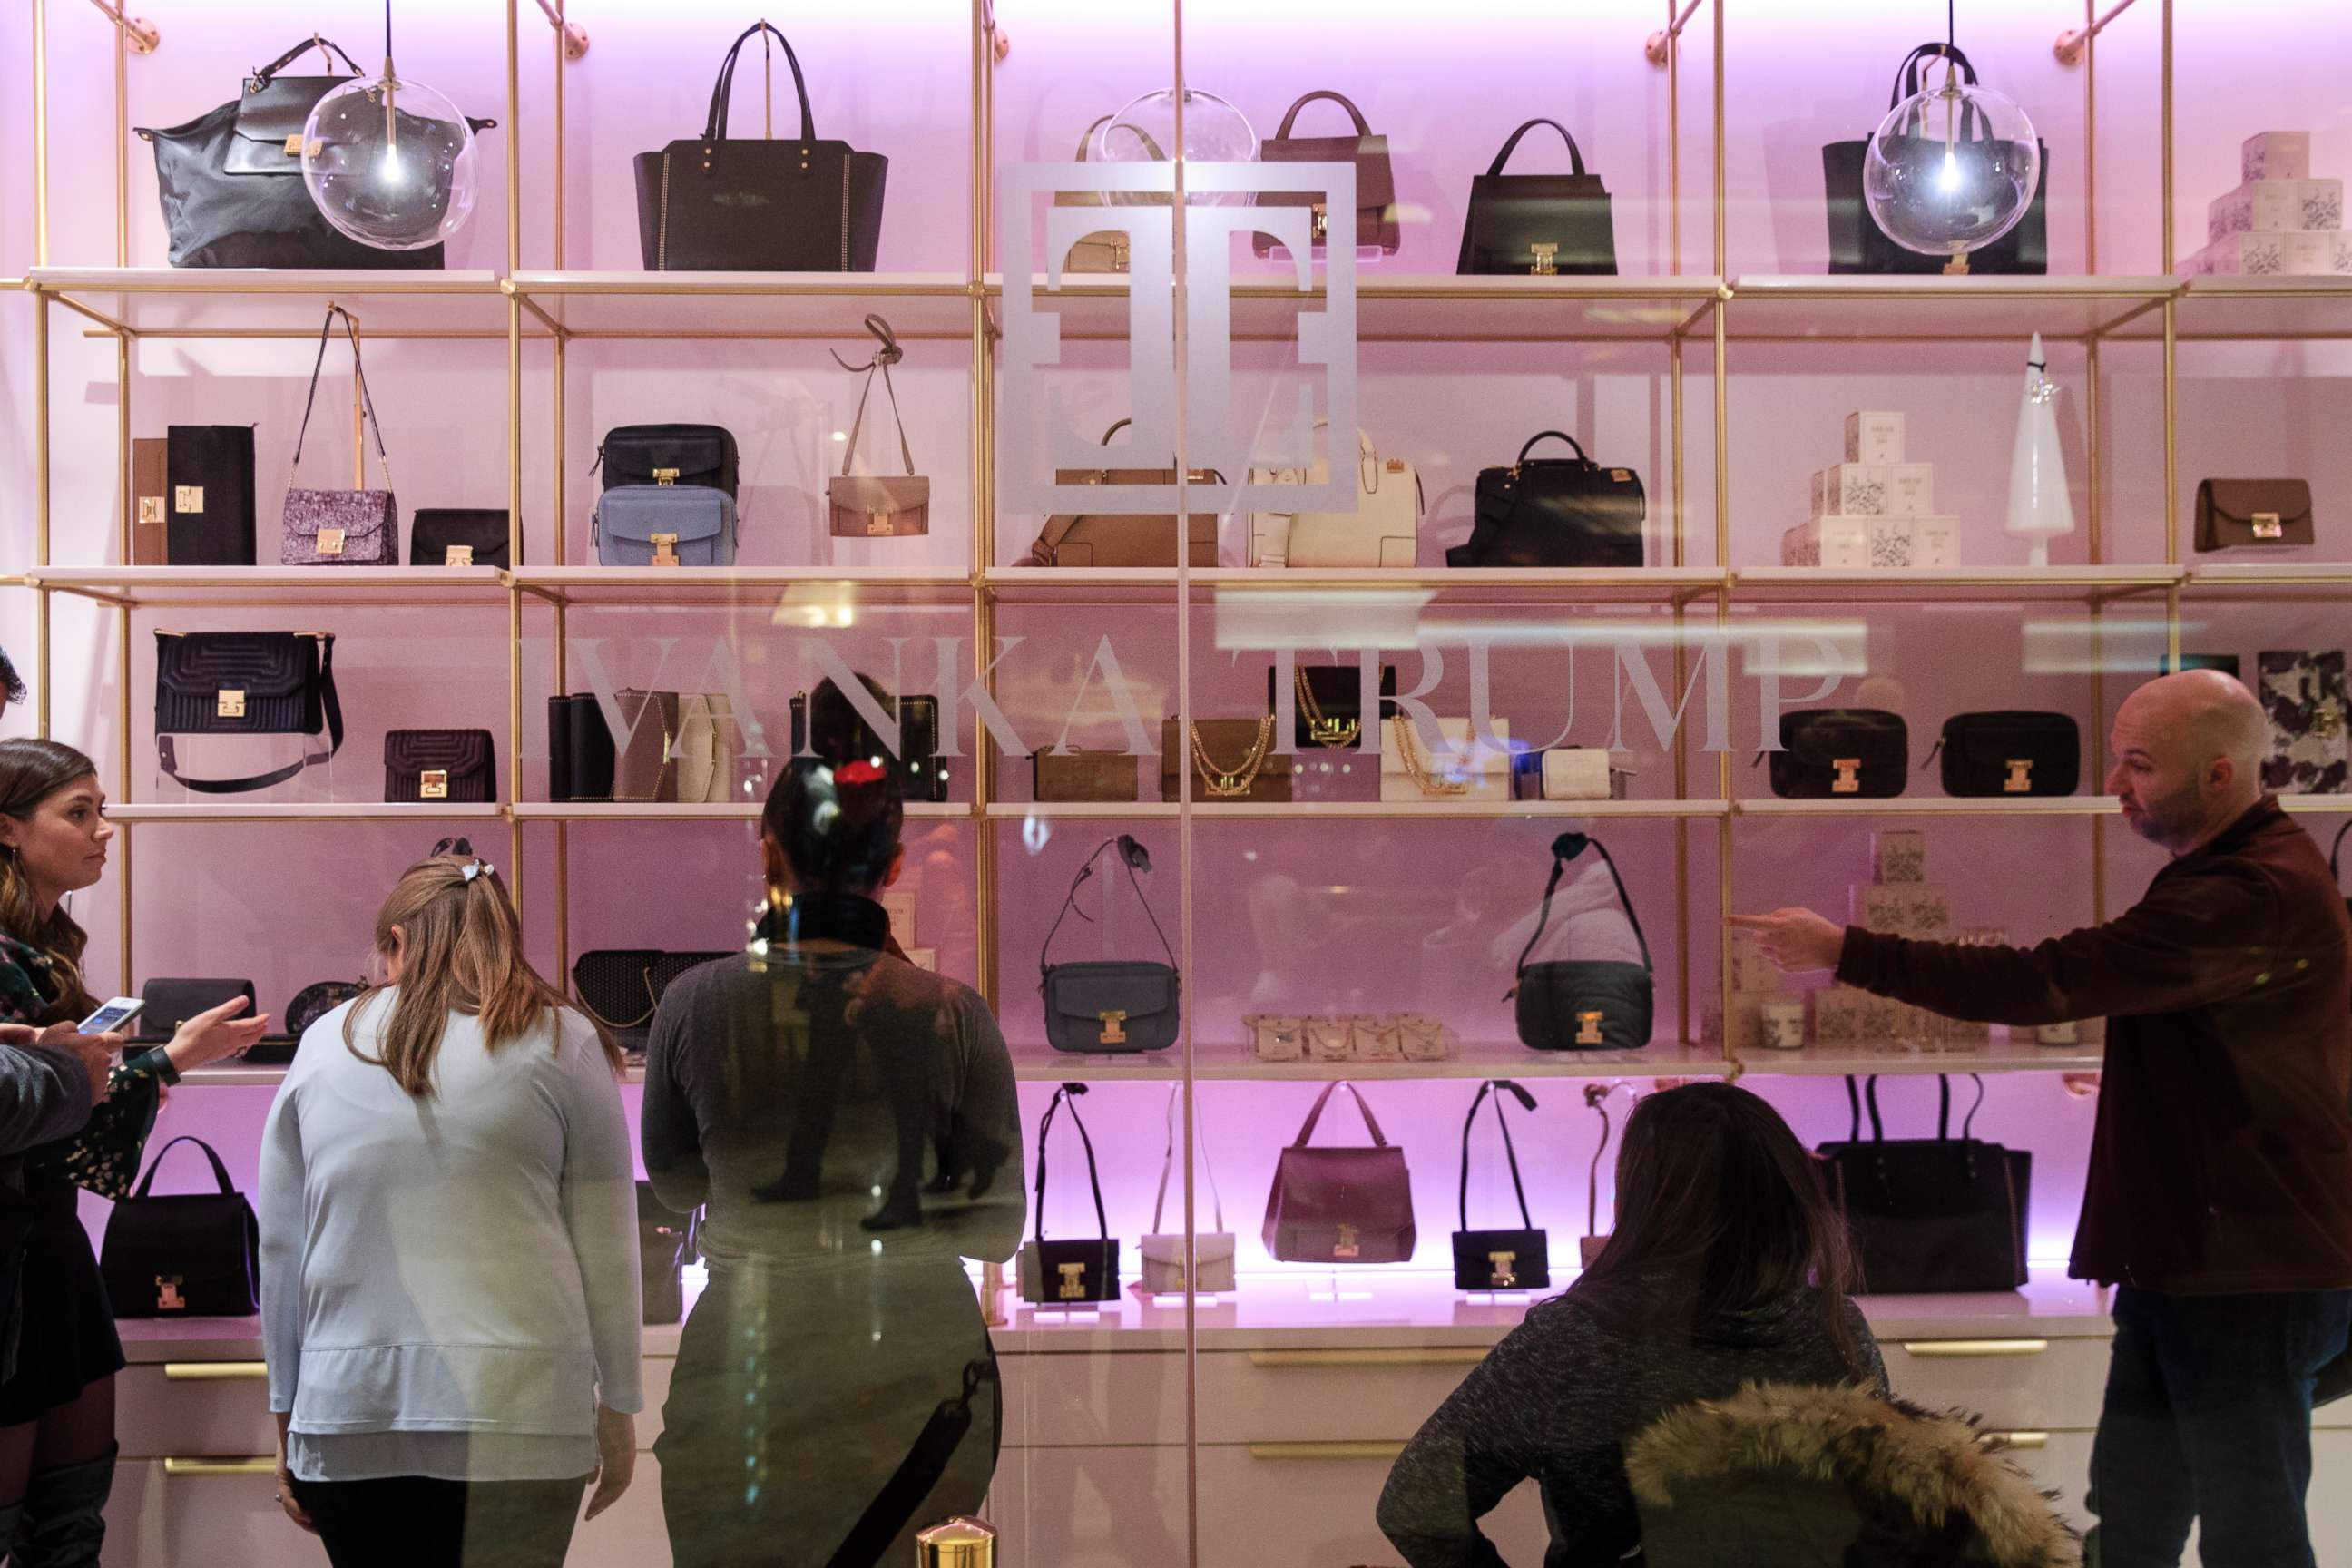 PHOTO: Customers shop at a new Ivanka Trump brand store in the lobby of Trump Tower, December 15, 2017 in New York City. 